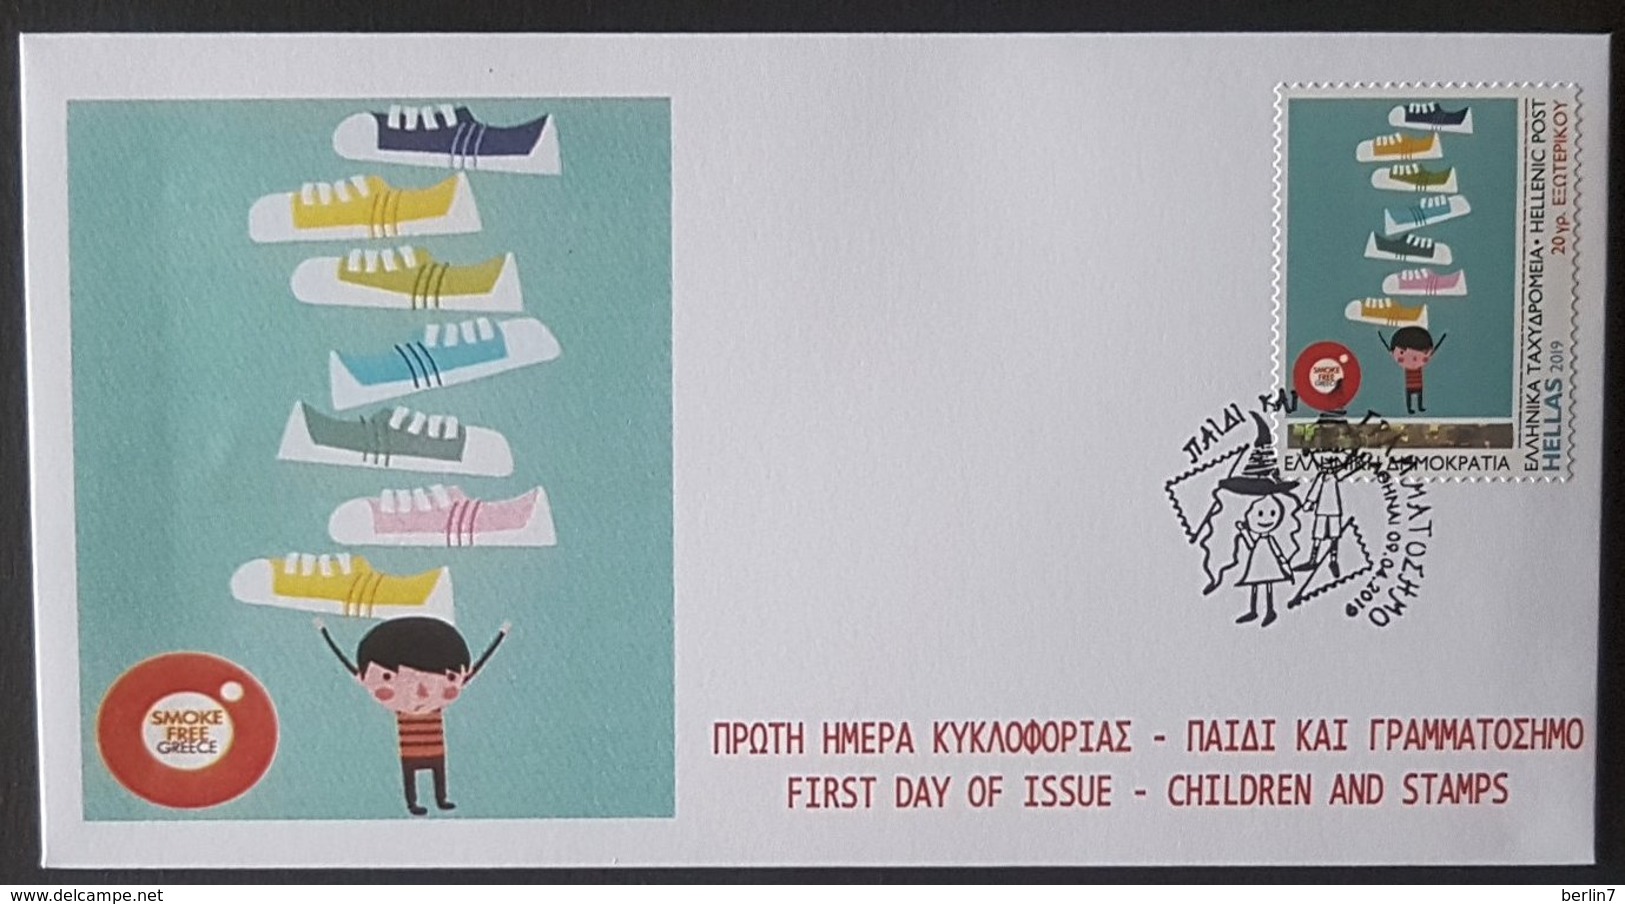 Greece 2019 Children And Stamps Unofficial FDC From The Self-adhesive Booklet Nine Different Covers - FDC